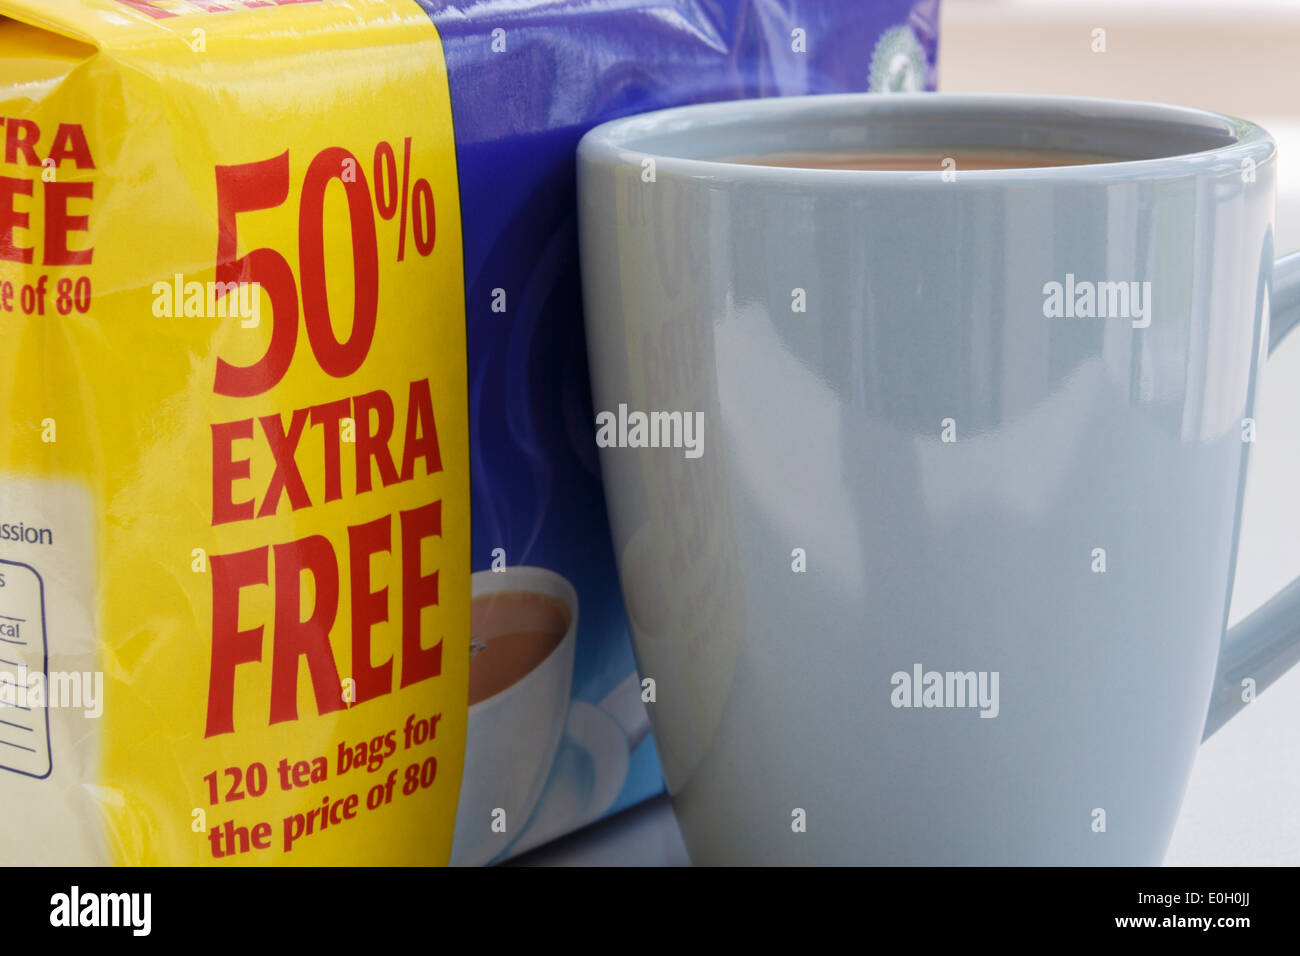 Good value discounted packet of Tetley's teabags with yellow label stating 50% extra free beside a mug of tea. England, UK, Britain Stock Photo